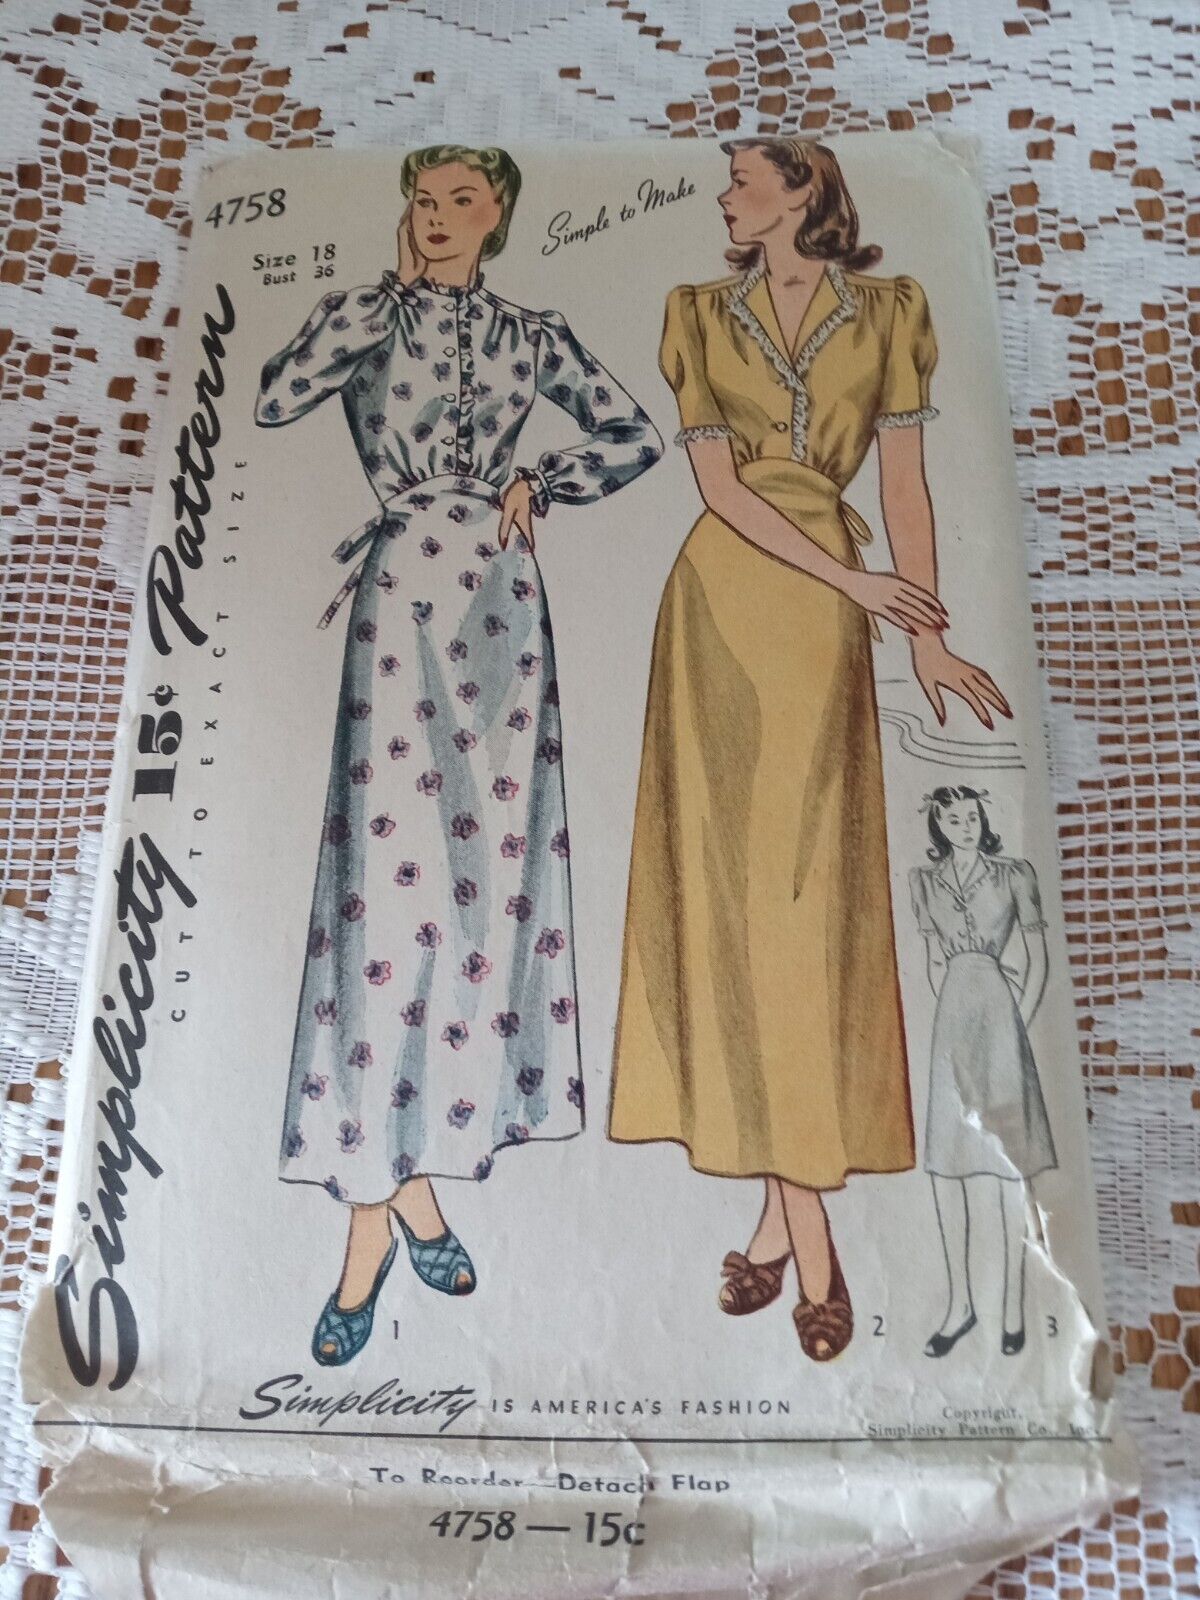 Vintage 1943 Simplicity Pattern 4758 Misses Night Gown sz 18 Bust 36